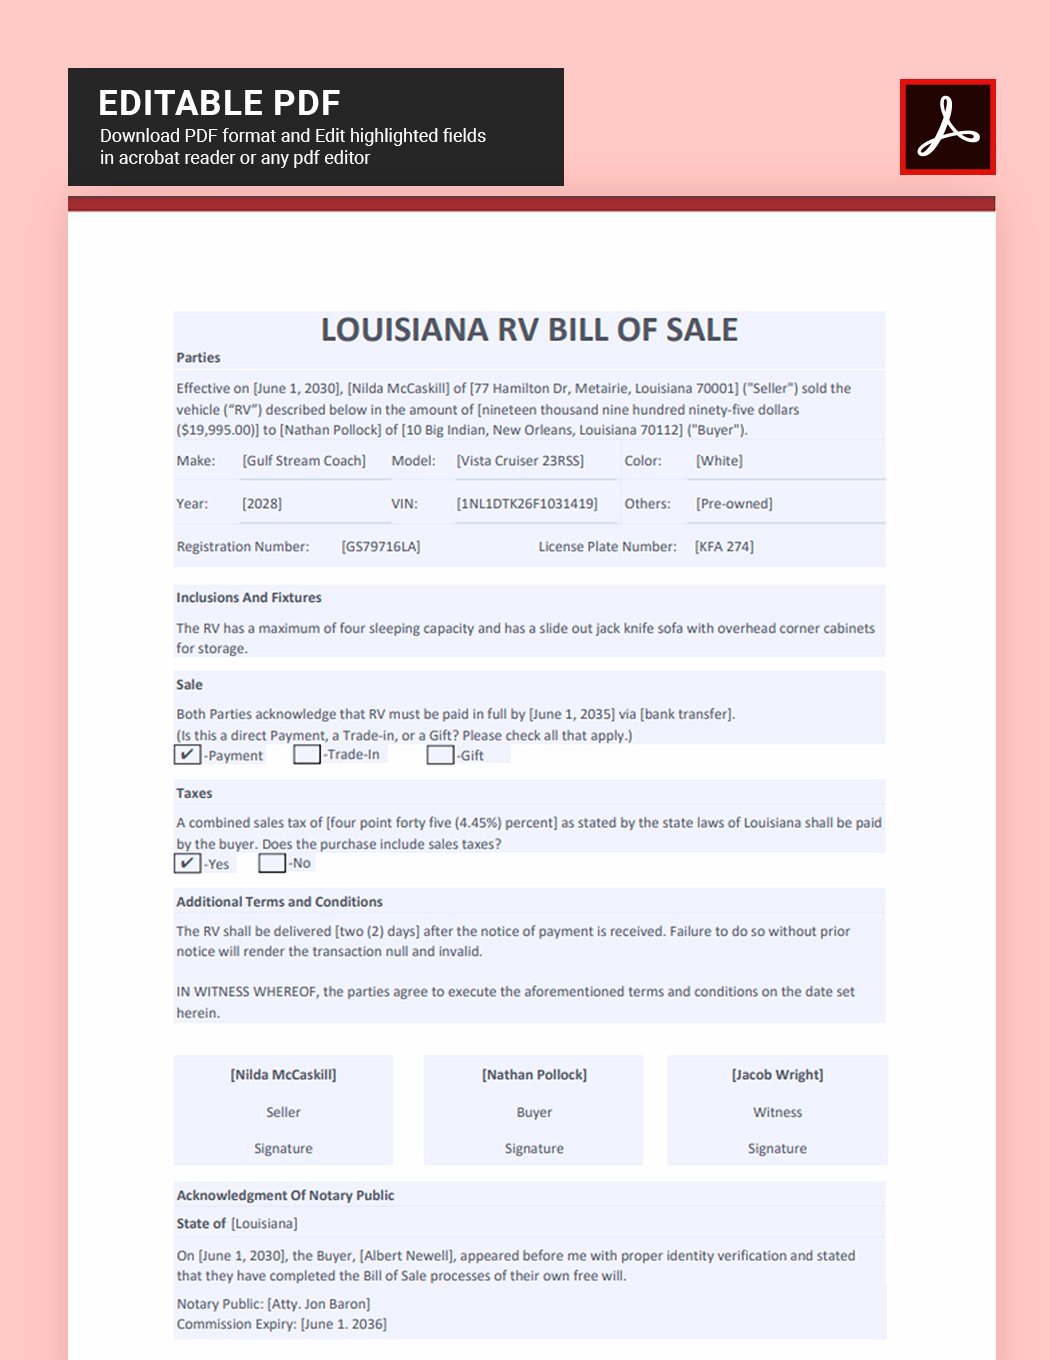 Free Louisiana RV Bill of Sale Form Template - Download in Word